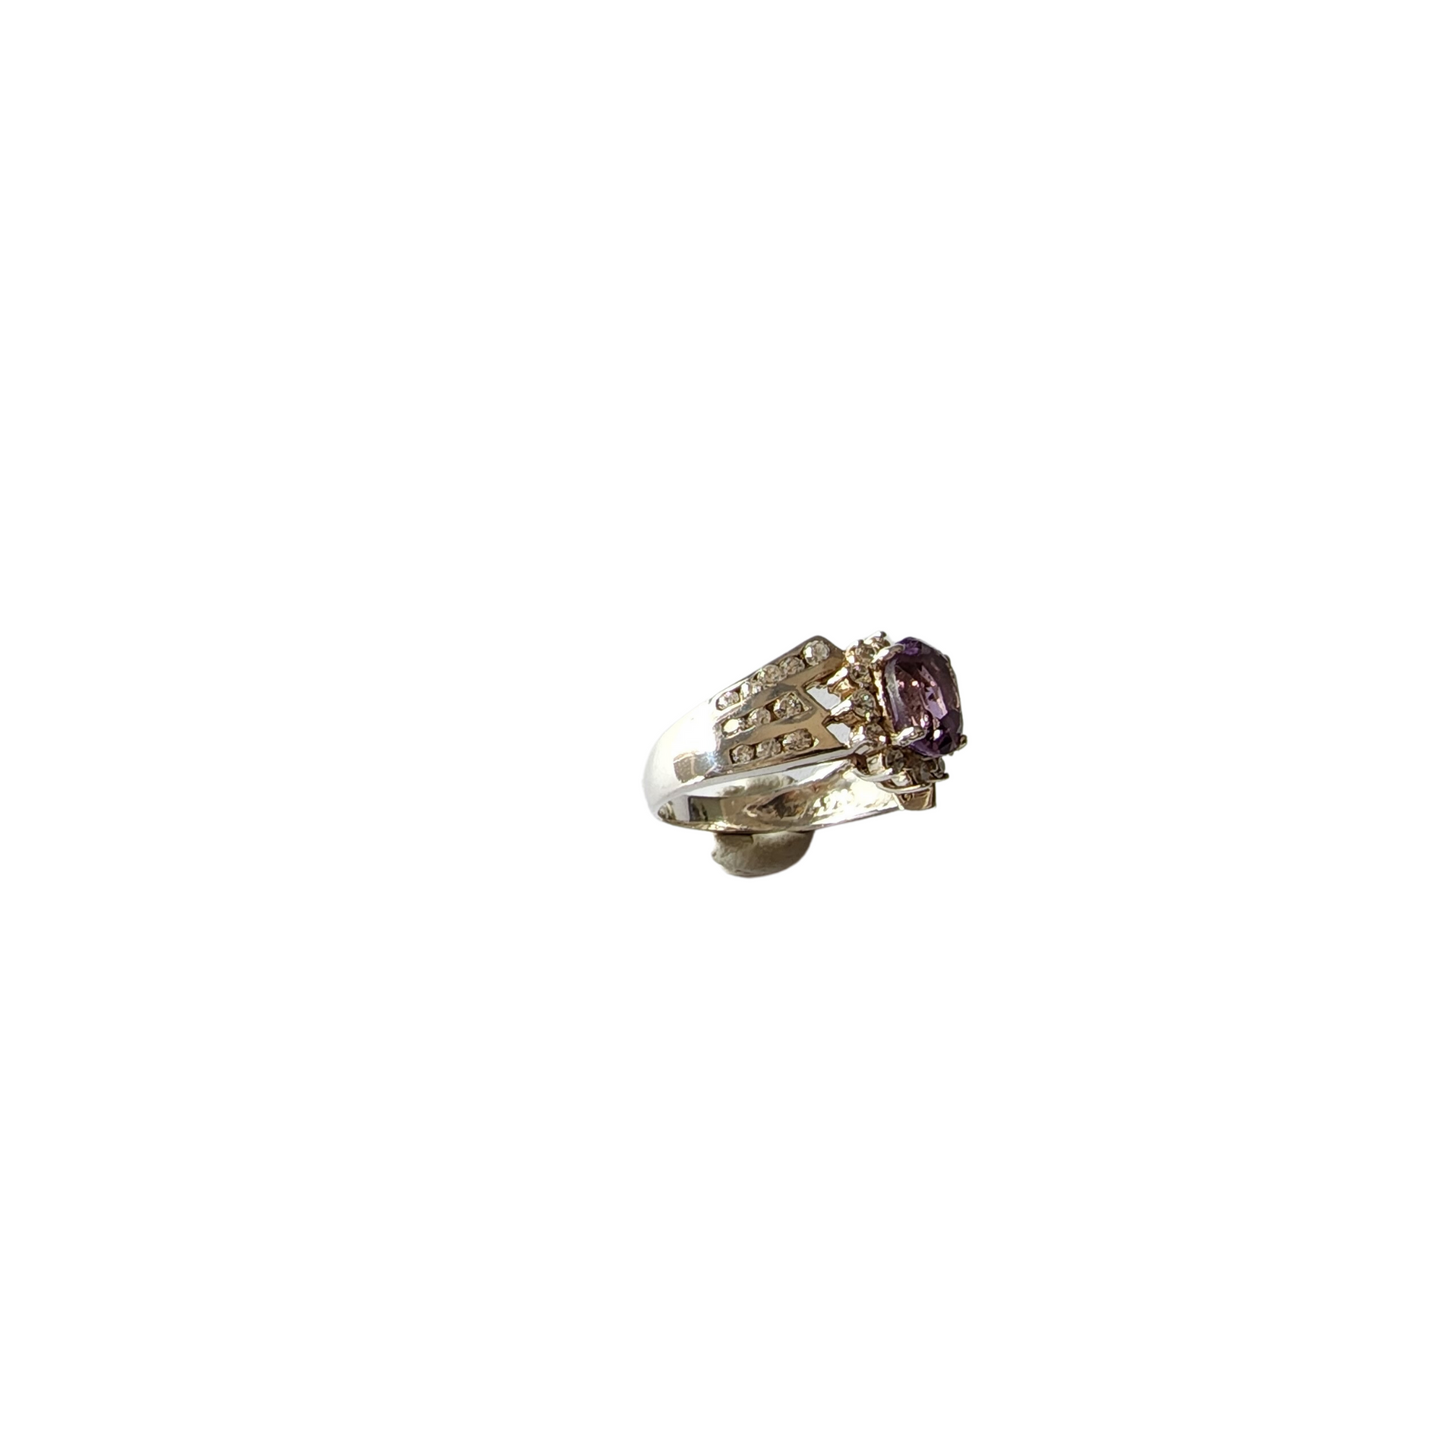 Vintage Womans Silver Cocktail Ring with Amethyst Stone